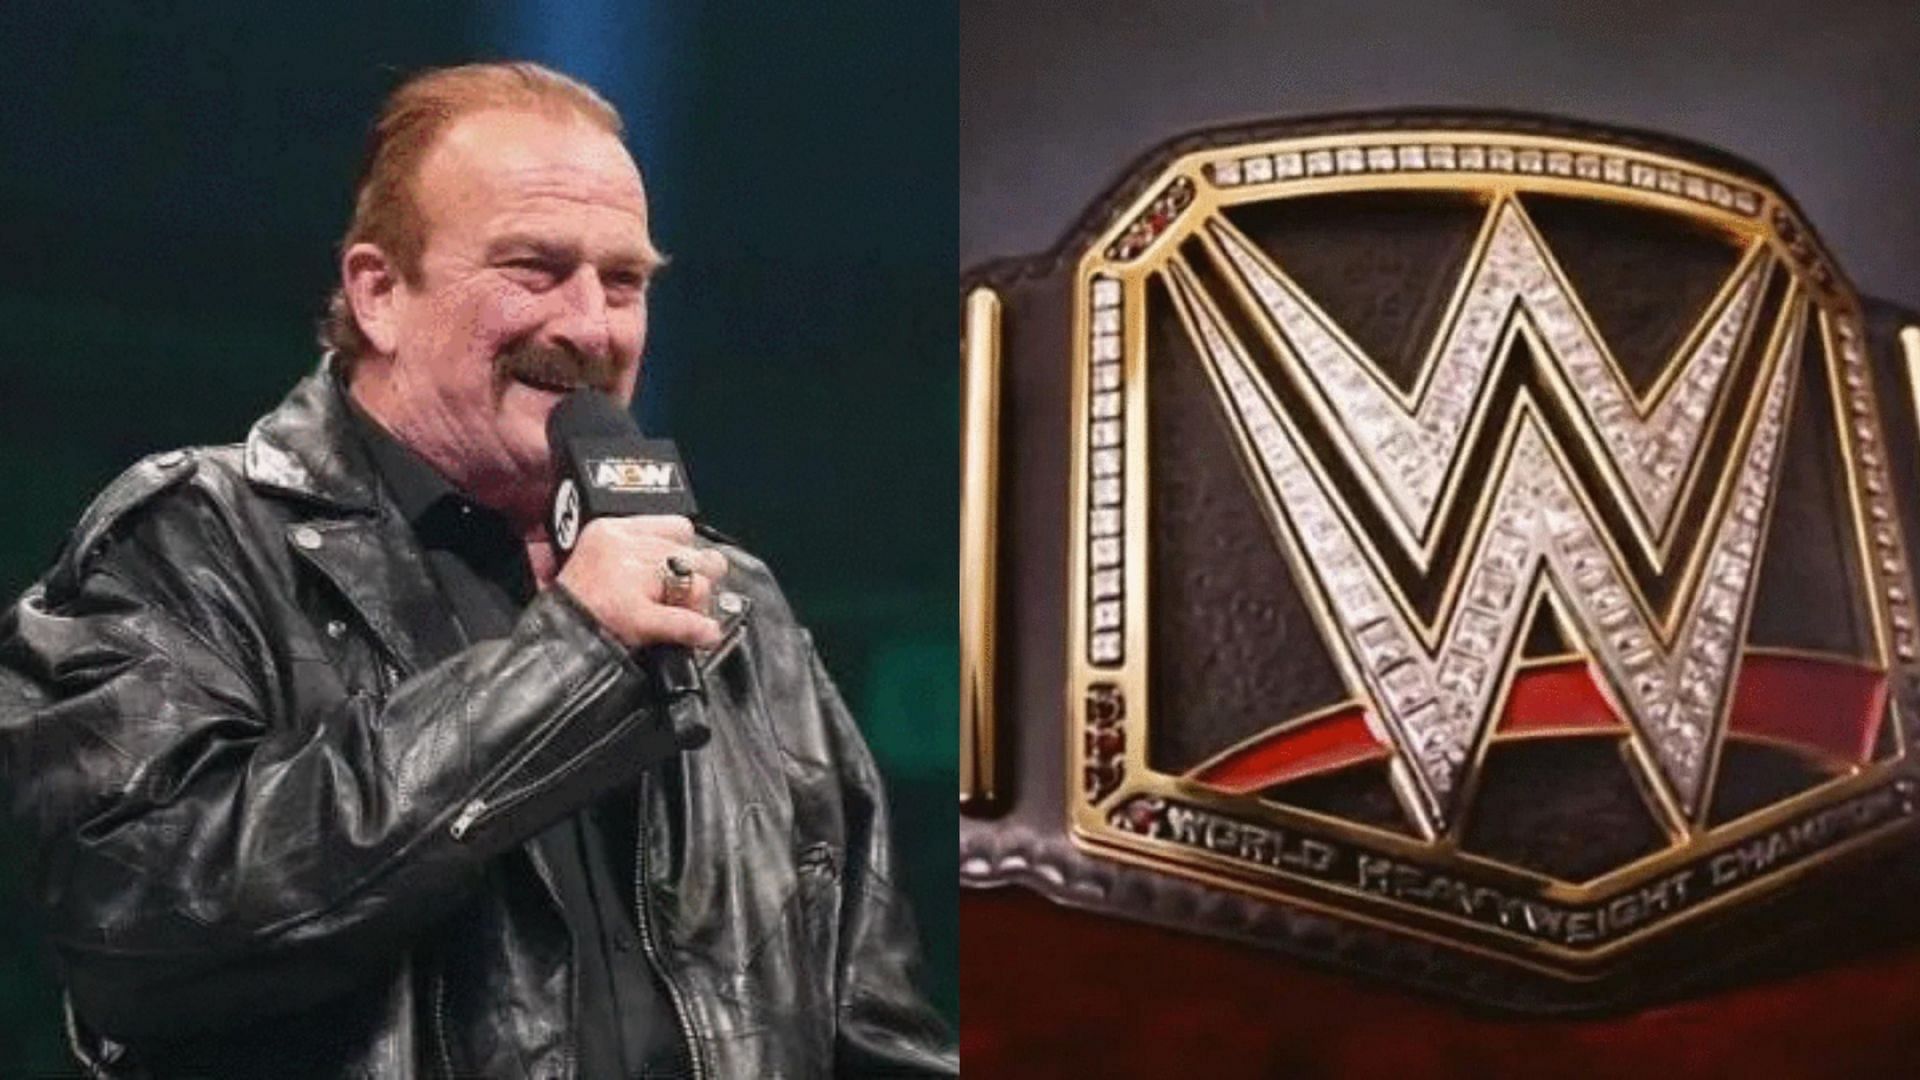 Jake Roberts has been a manager in AEW since 2020.